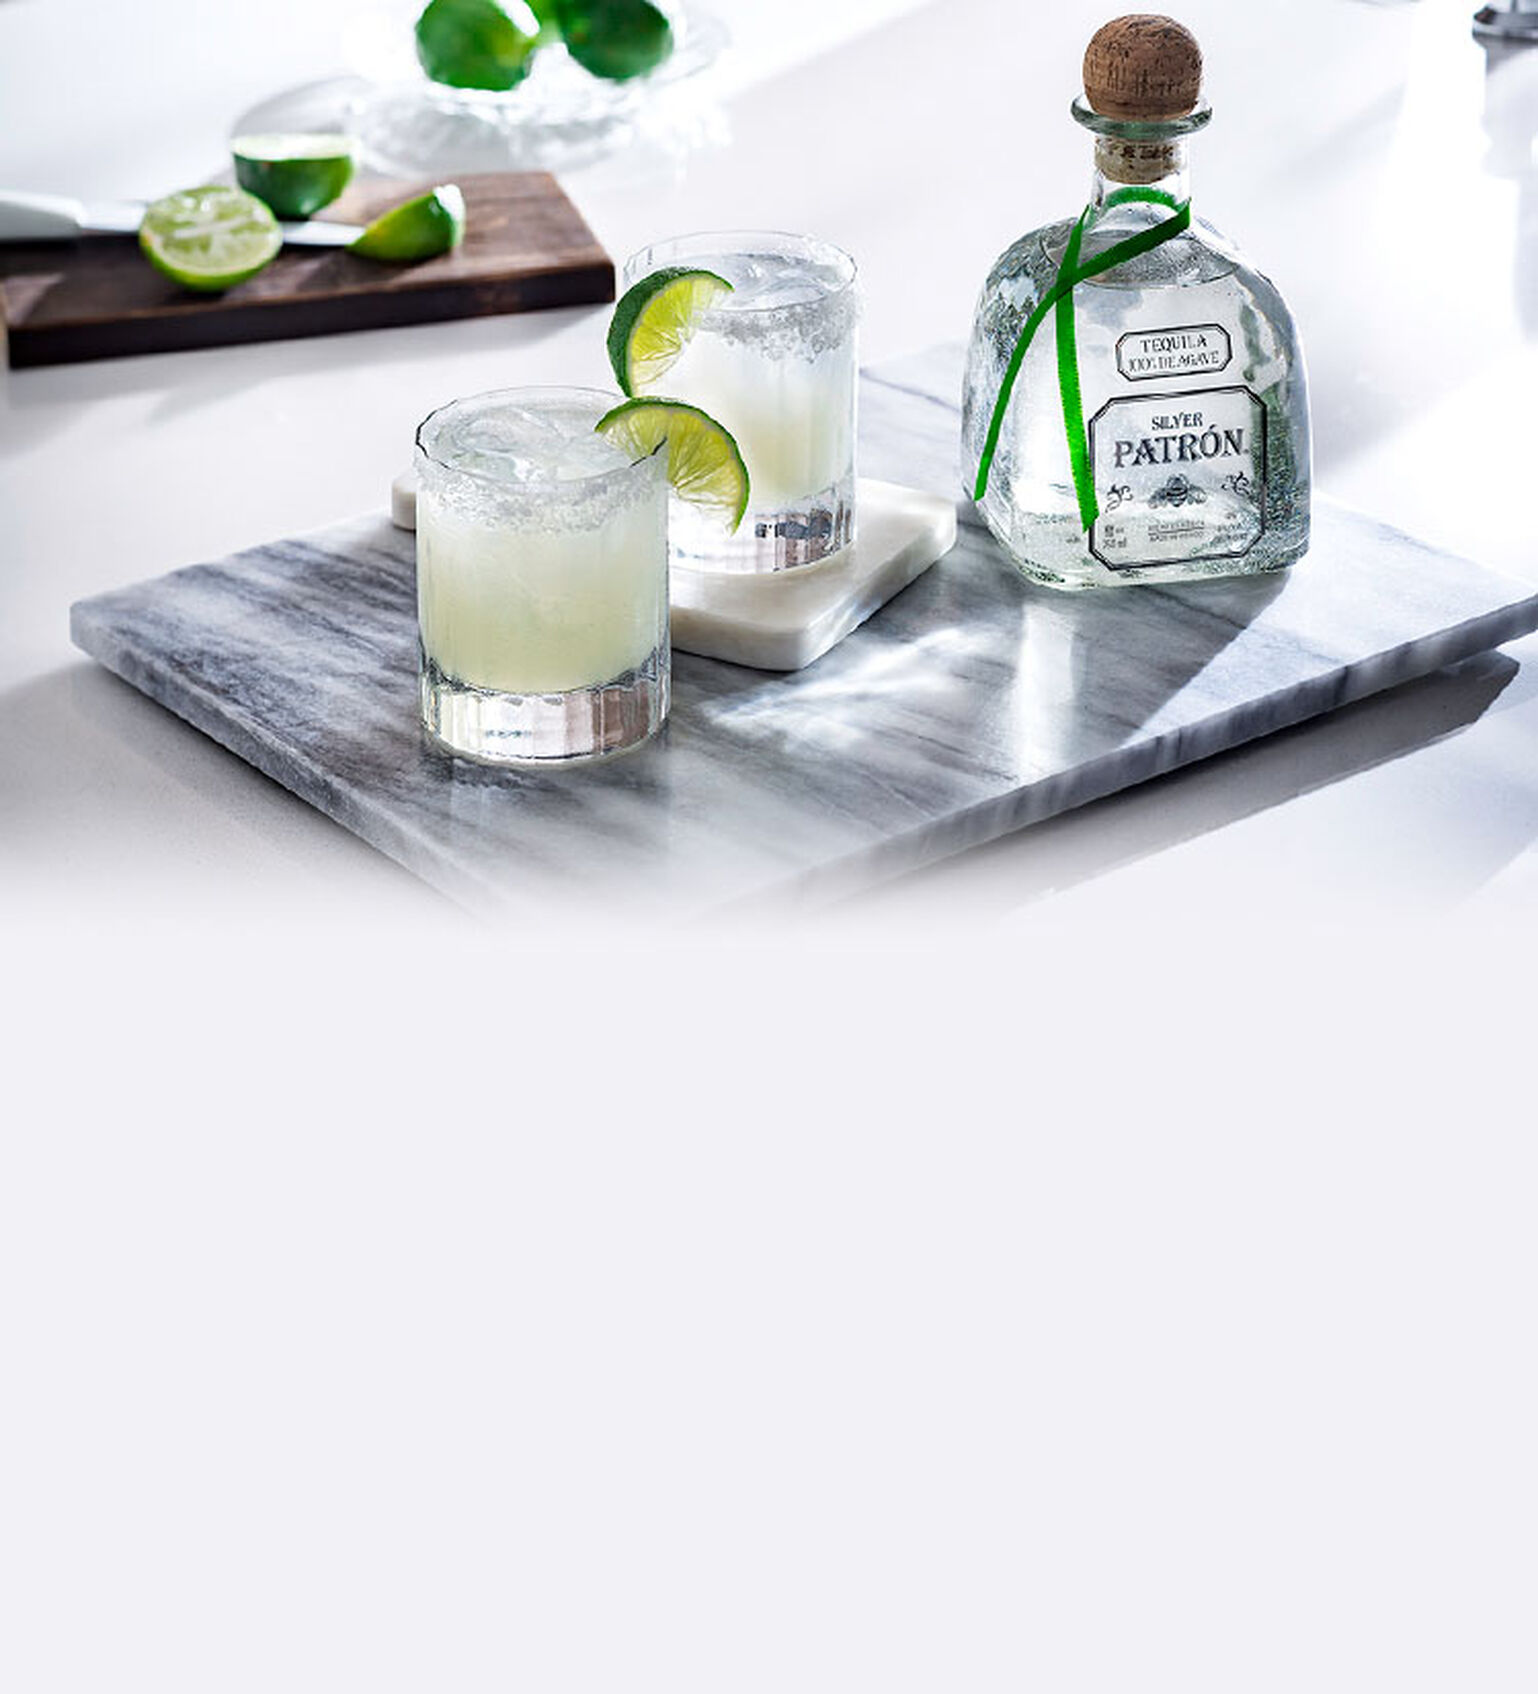 Image of a Patron Margarita served on a marble tray